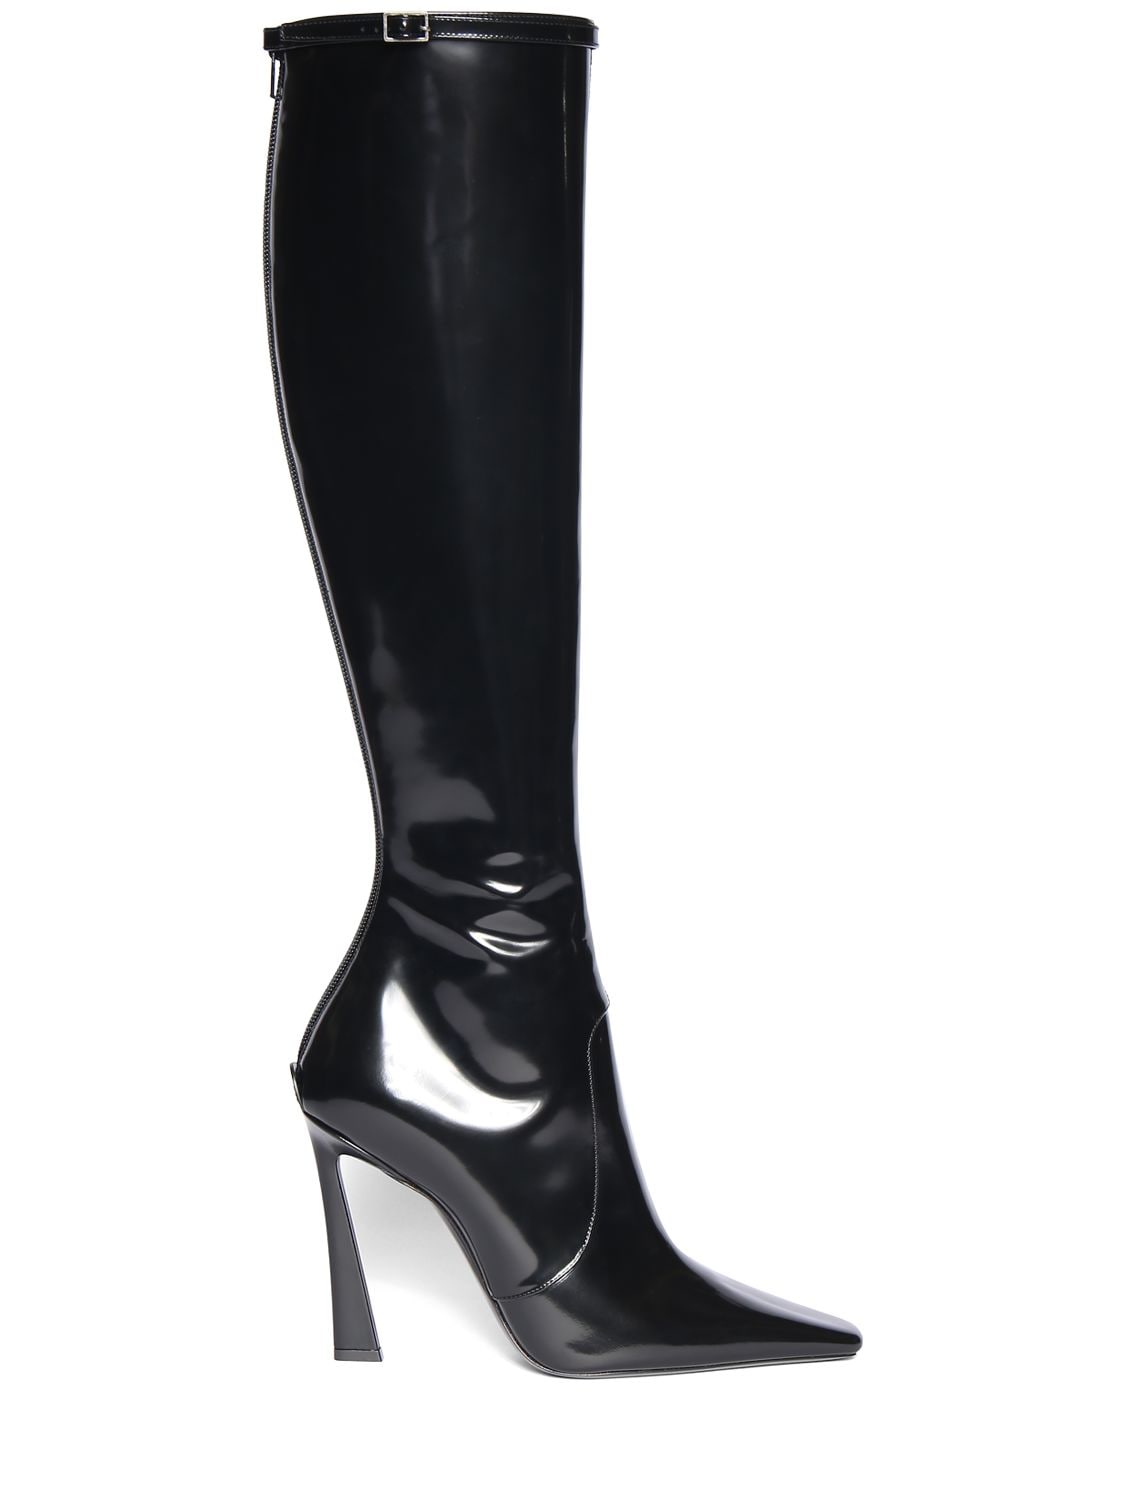 110mm Tess Patent Leather Tall Boots